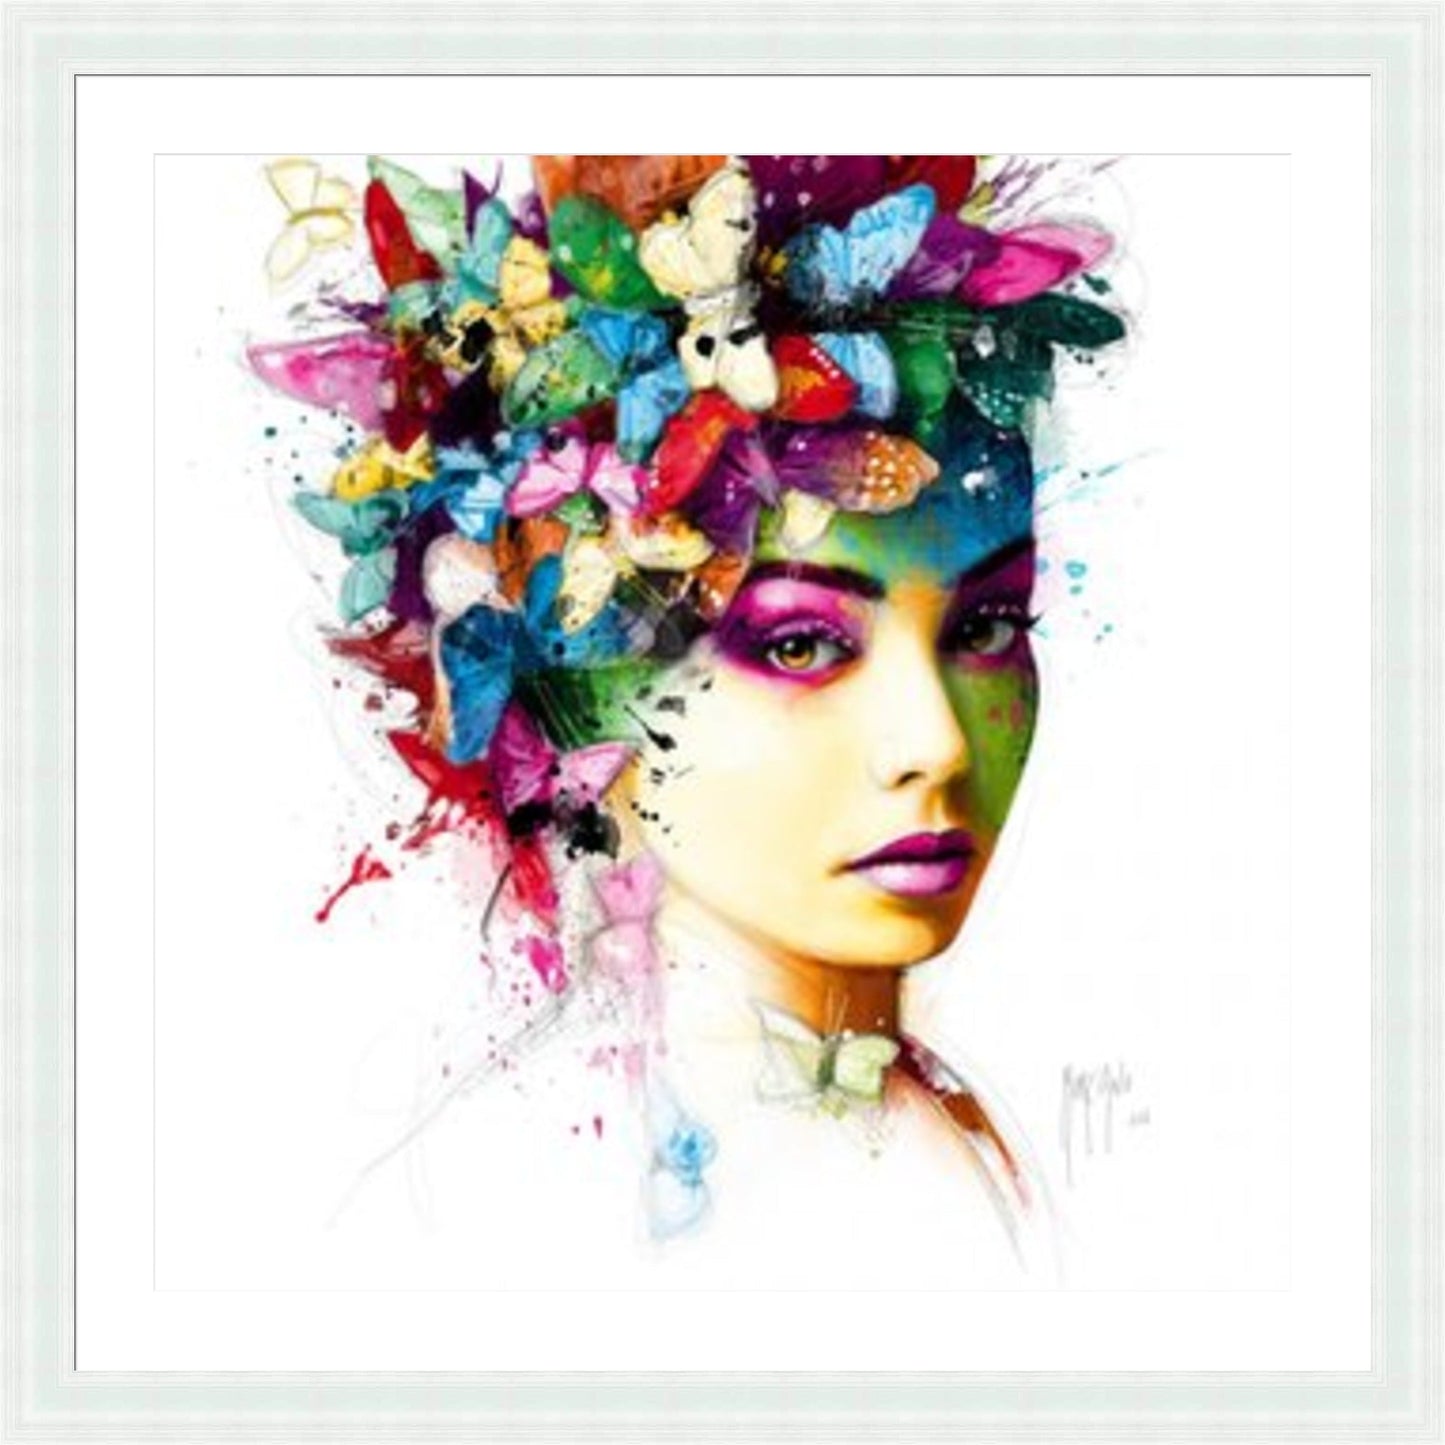 L'Effet Papillion by Patrice Murciano